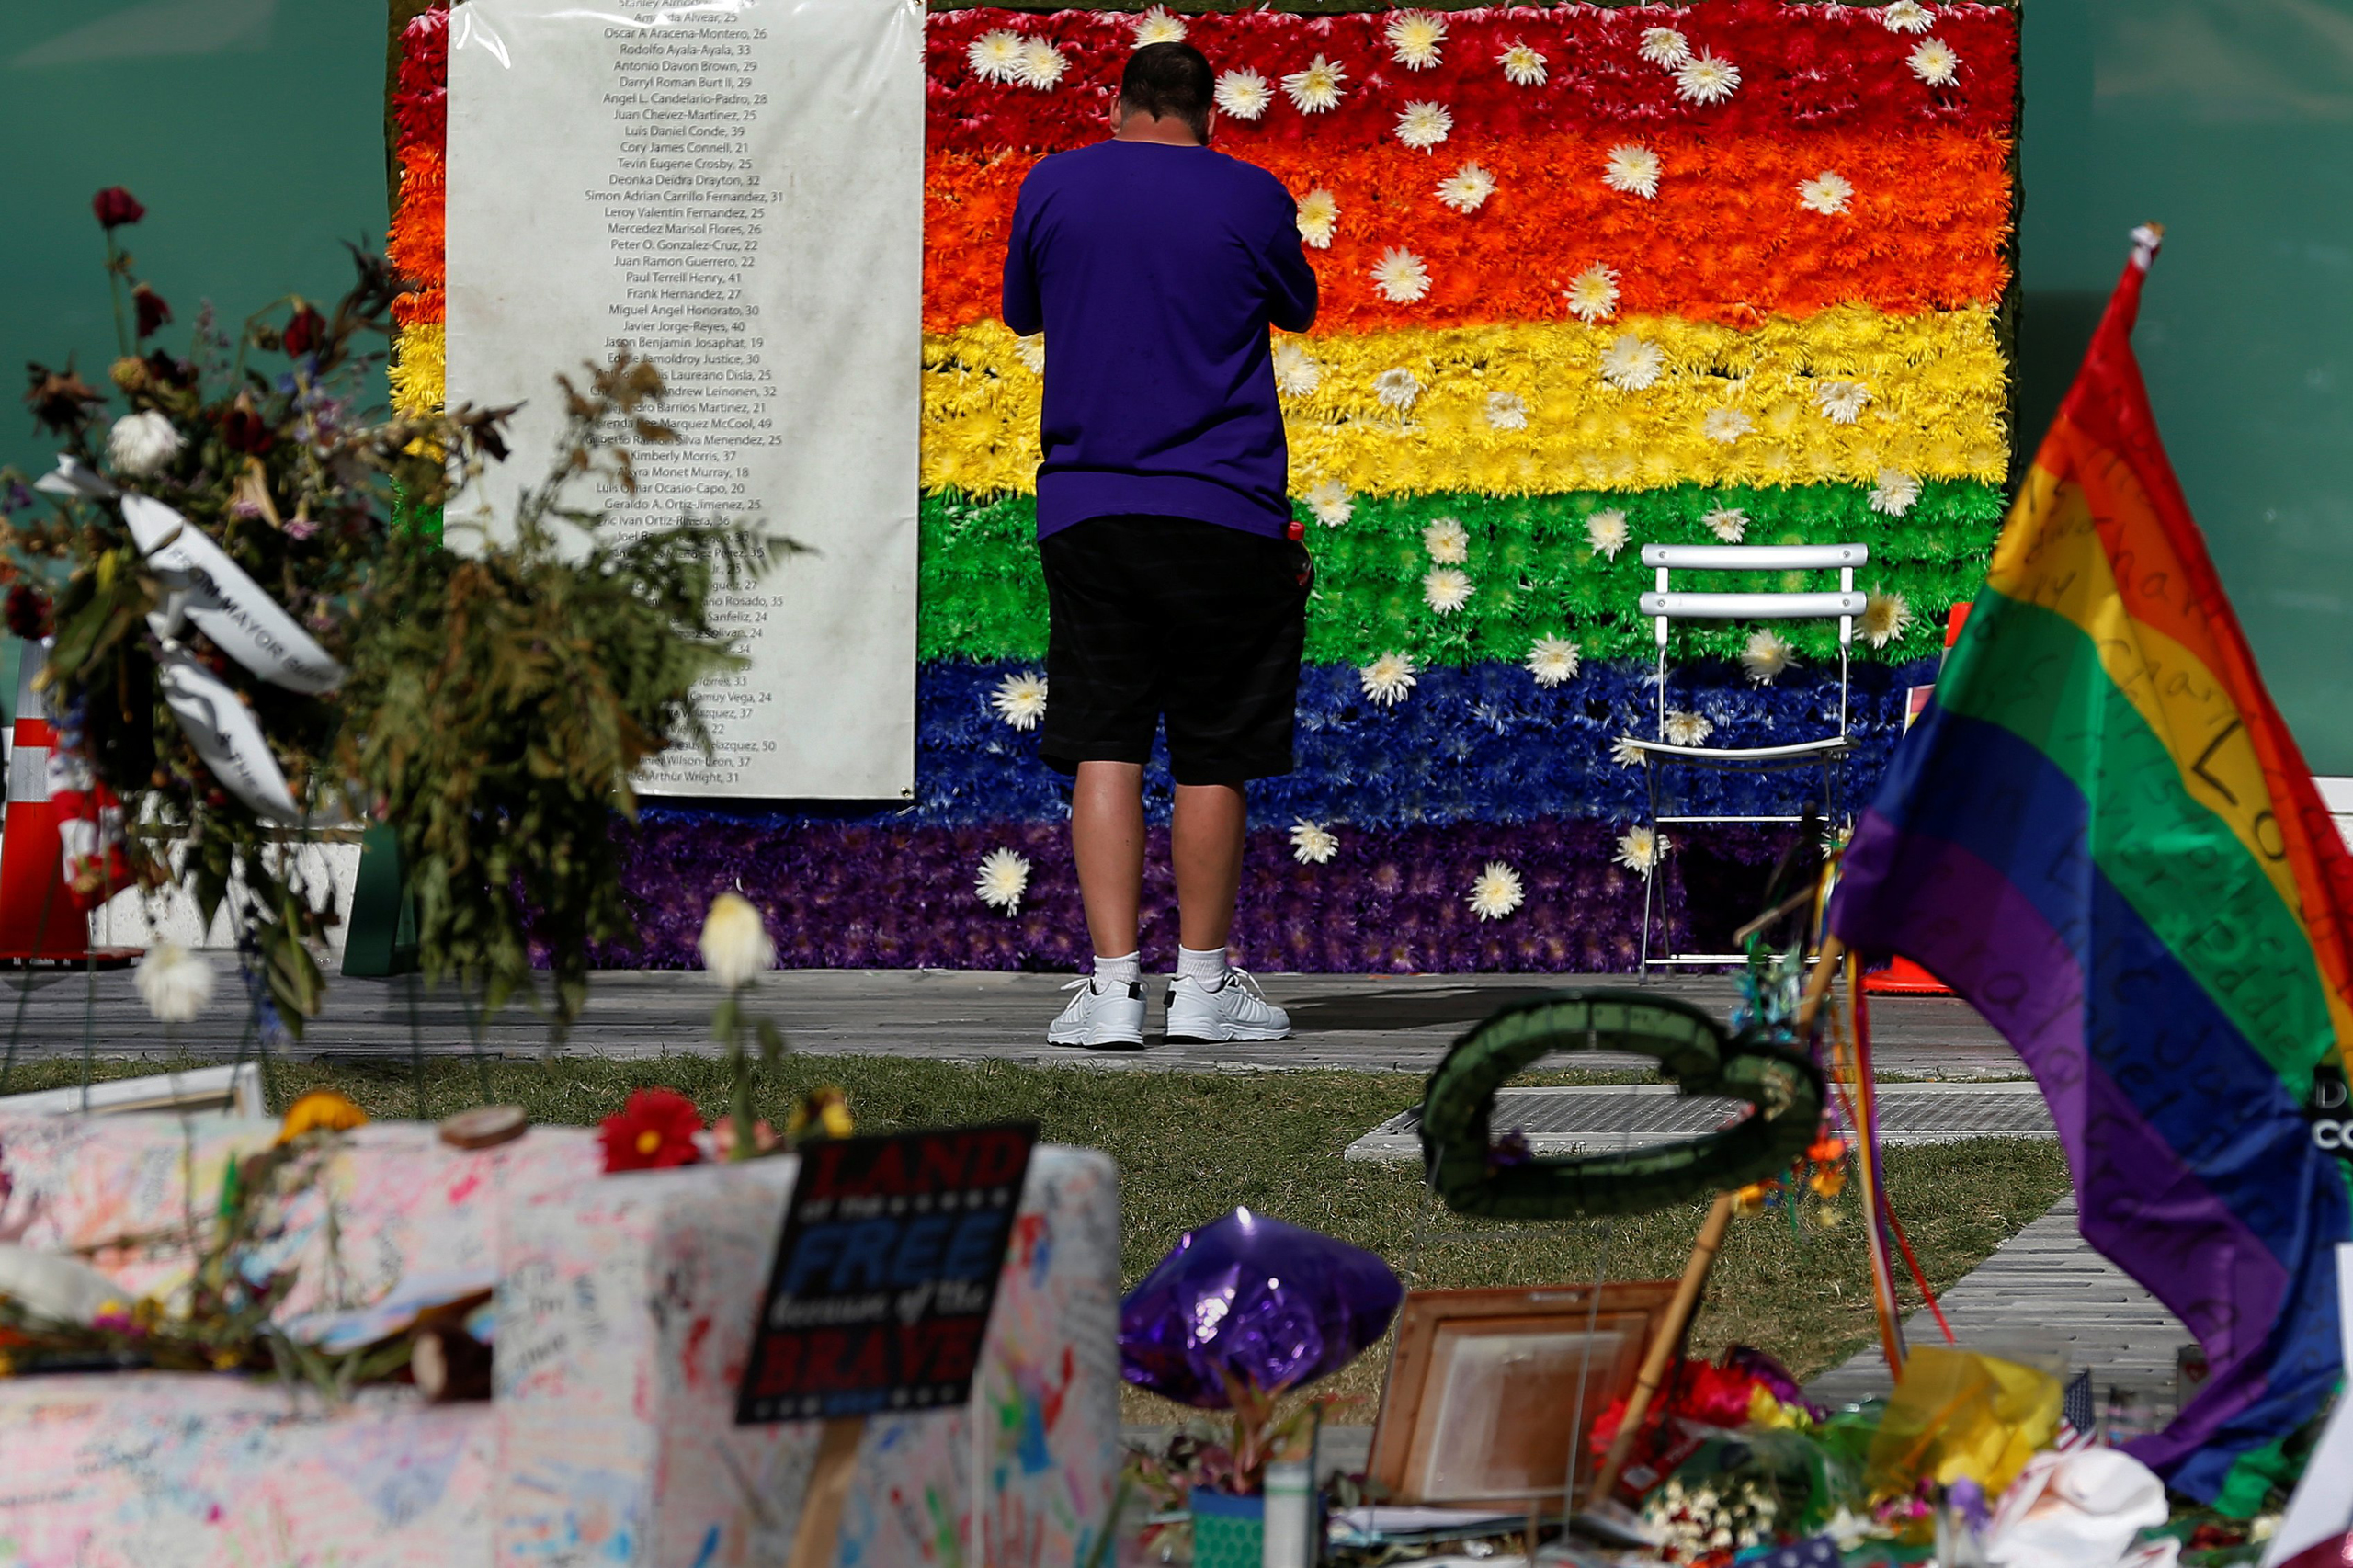 A man pays respect at a rainbow flower wall as part of the makeshift memorial for the Pulse nightclub mass shooting victims last week in Orlando